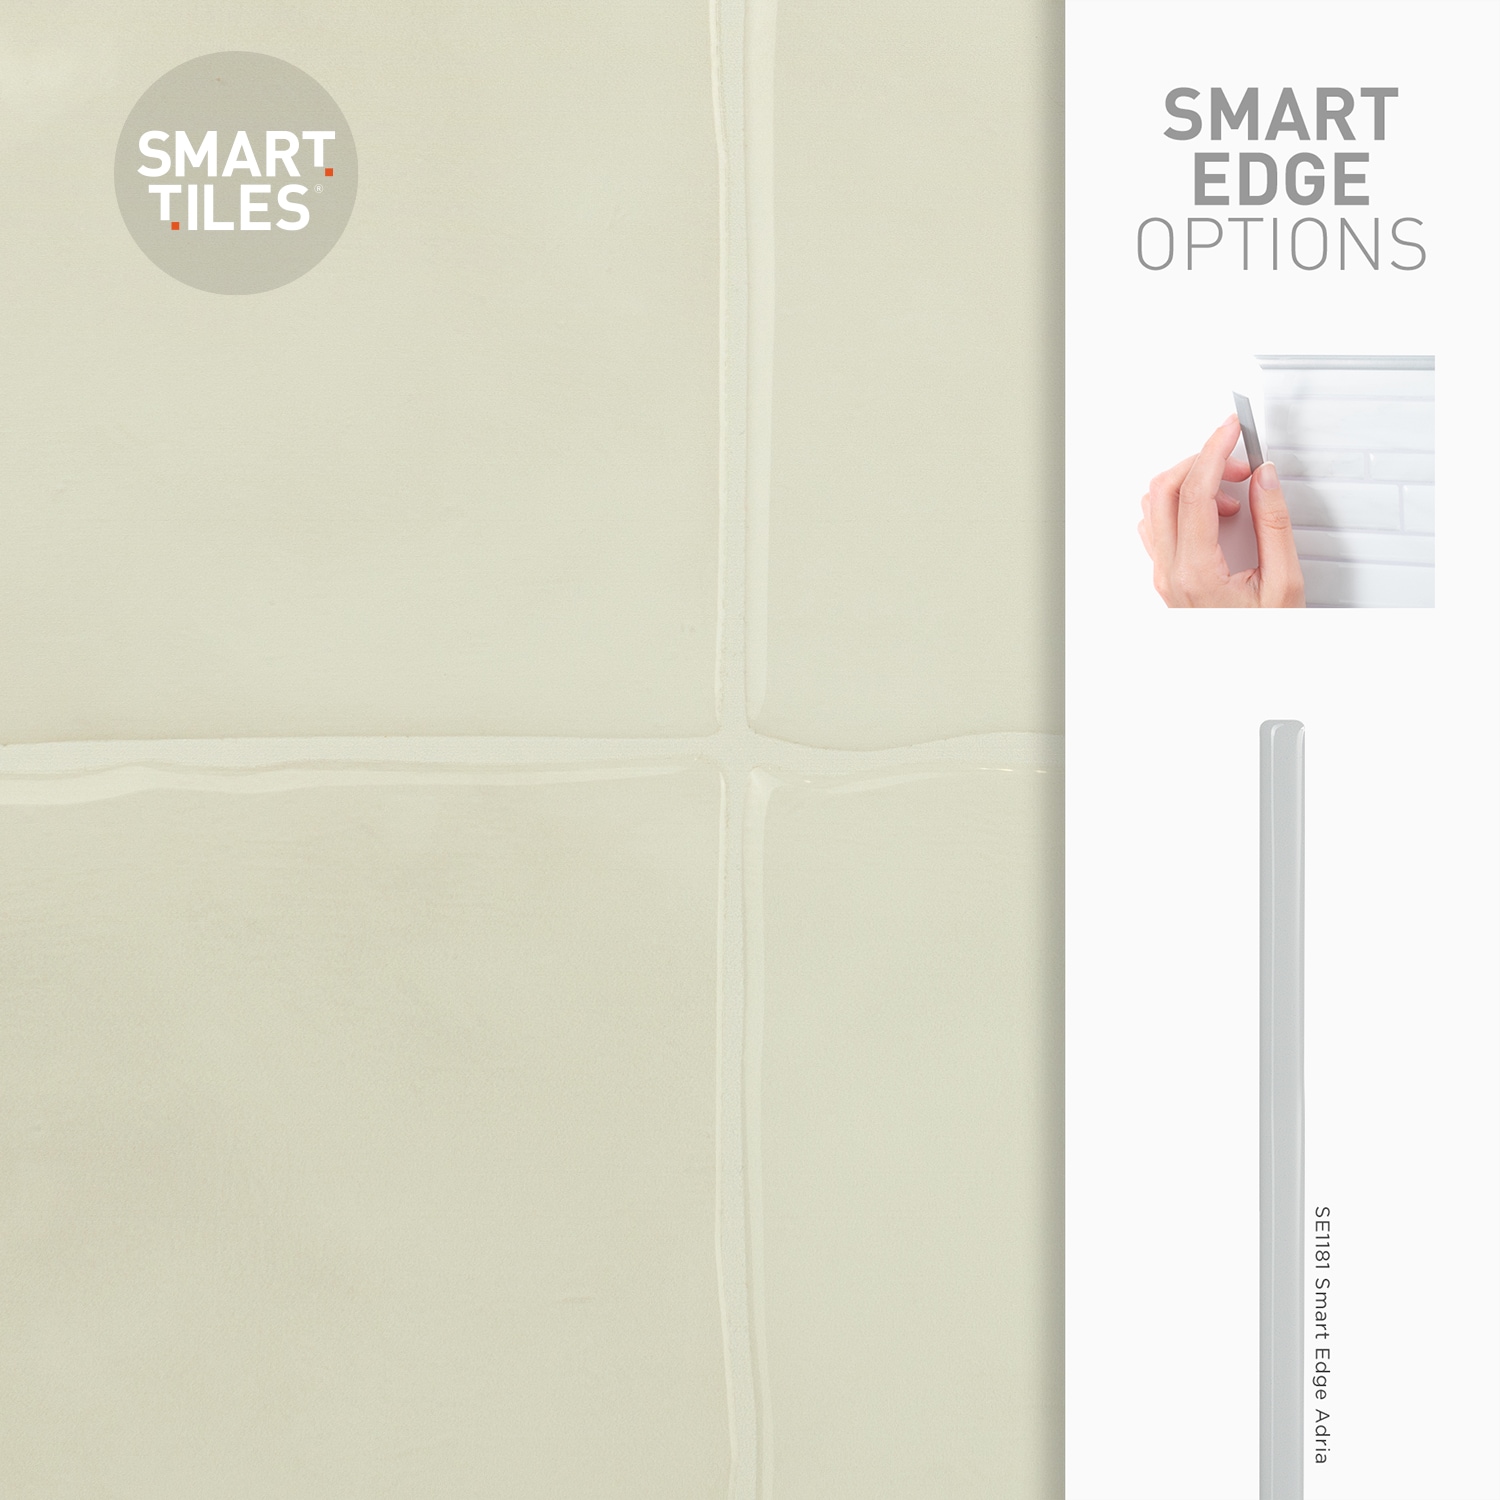 New products, Smart Tiles